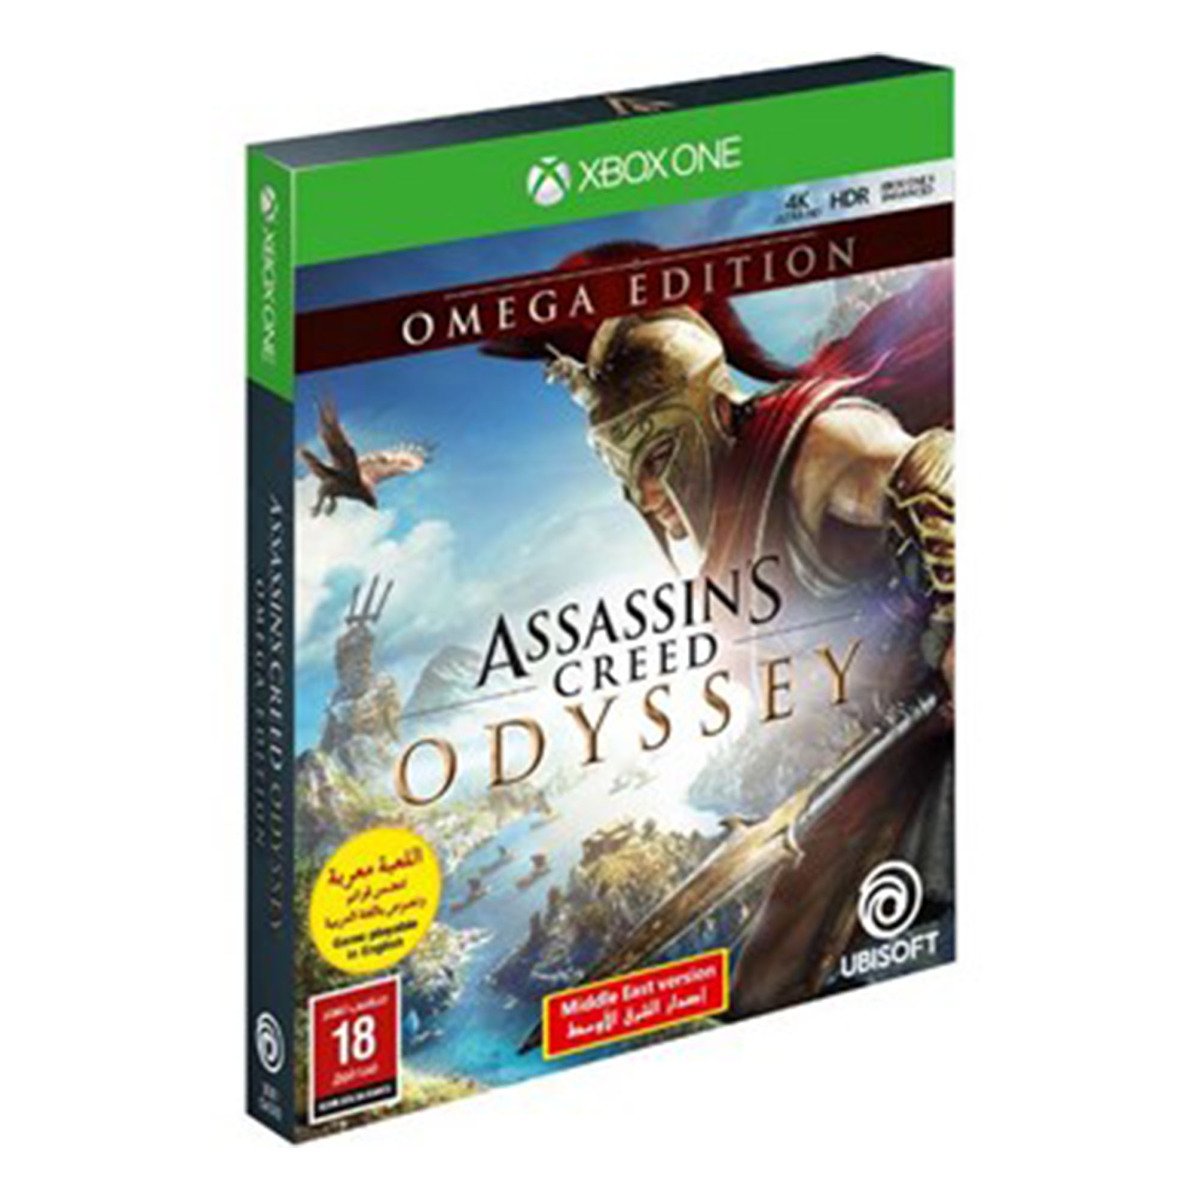 Xbox One Assassins Creed Odyssey Omega Edition